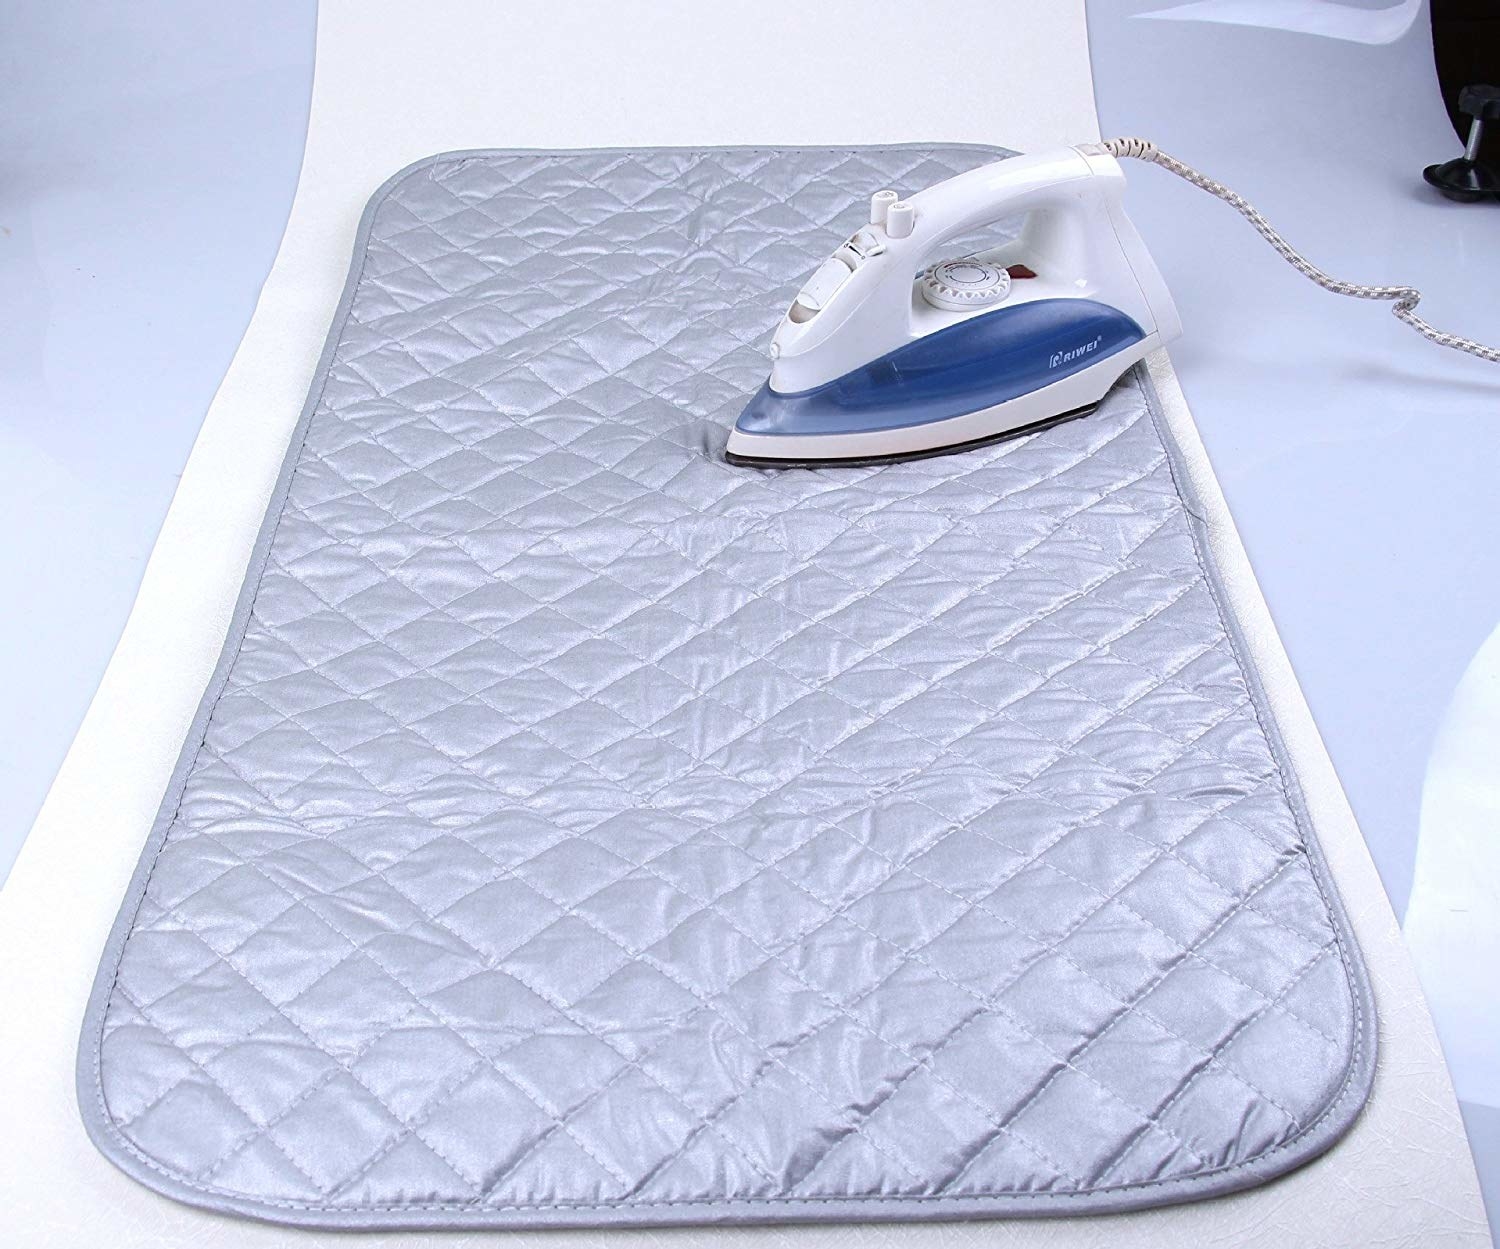 A thick quilted mat with an iron lying on it